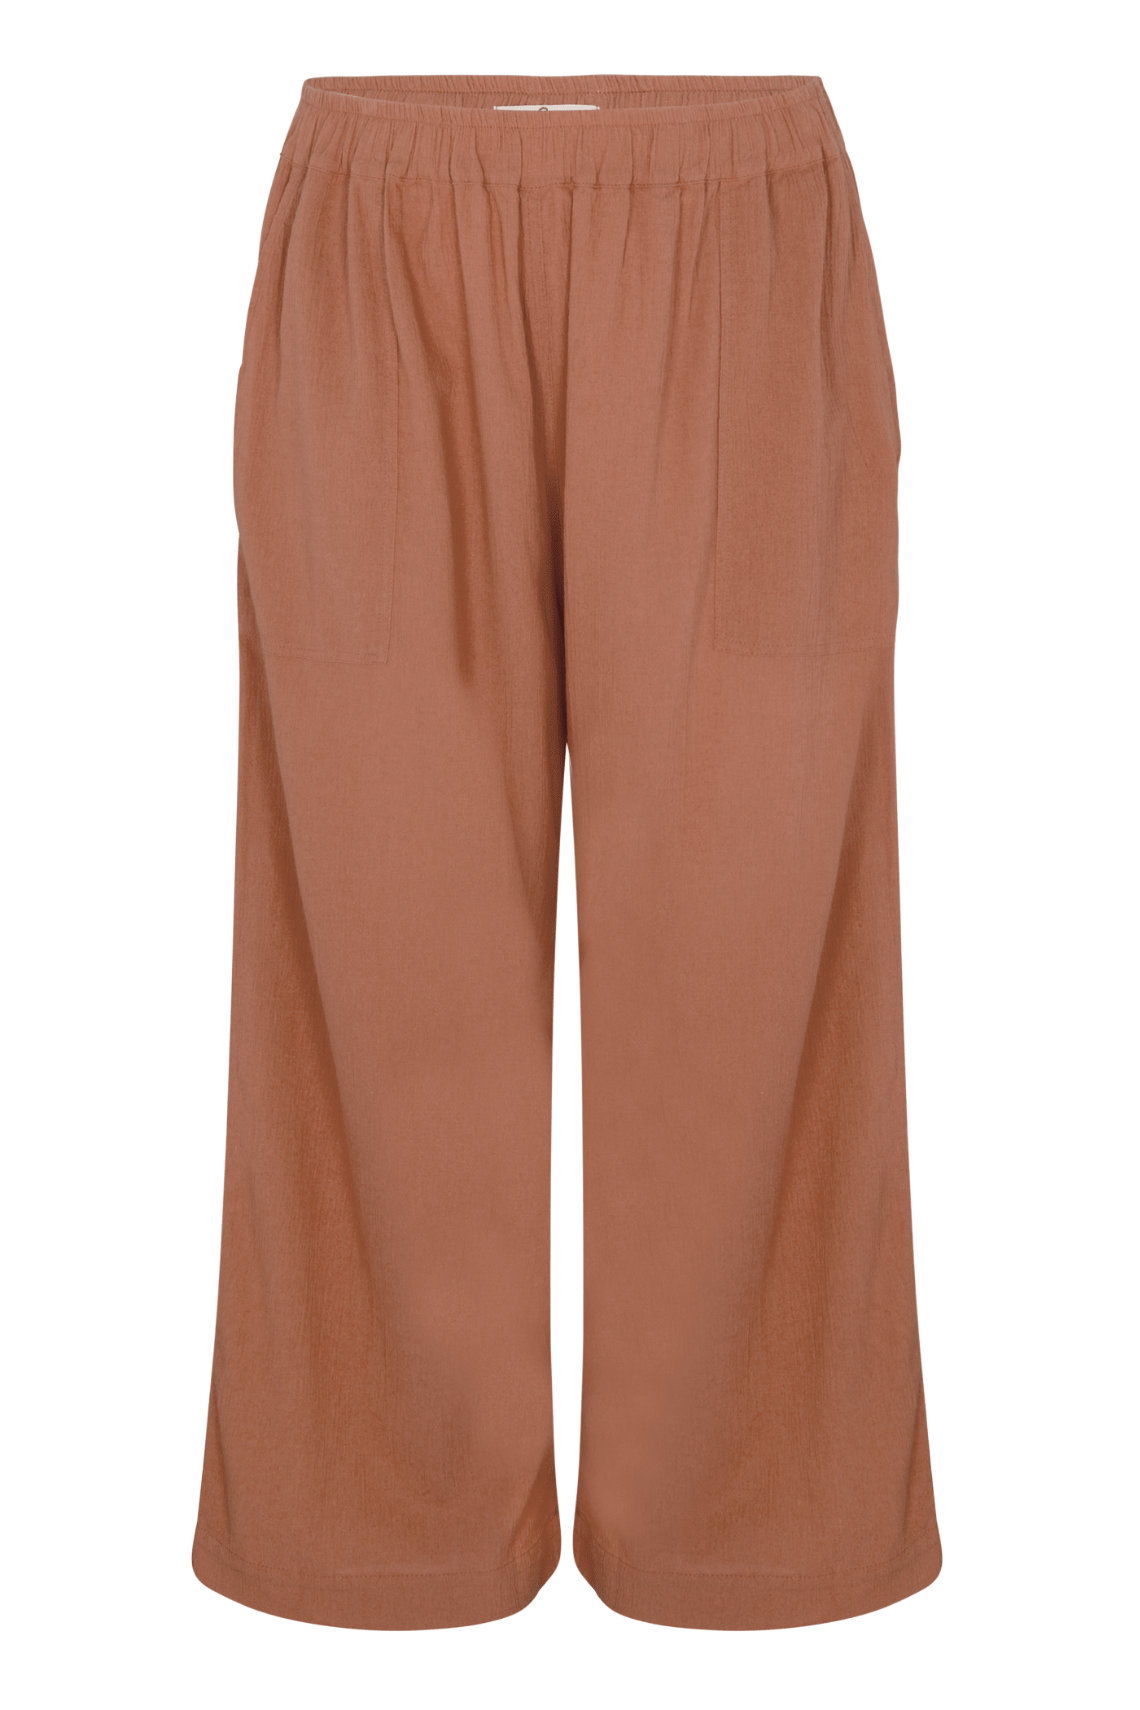 Luxury Sile OddBird | Indoor Wear | and Canyon Soft | Sile Outdoor Loungewear – Pants Size Top in 100% Plus Cotton Kardeş Rose and Turkish